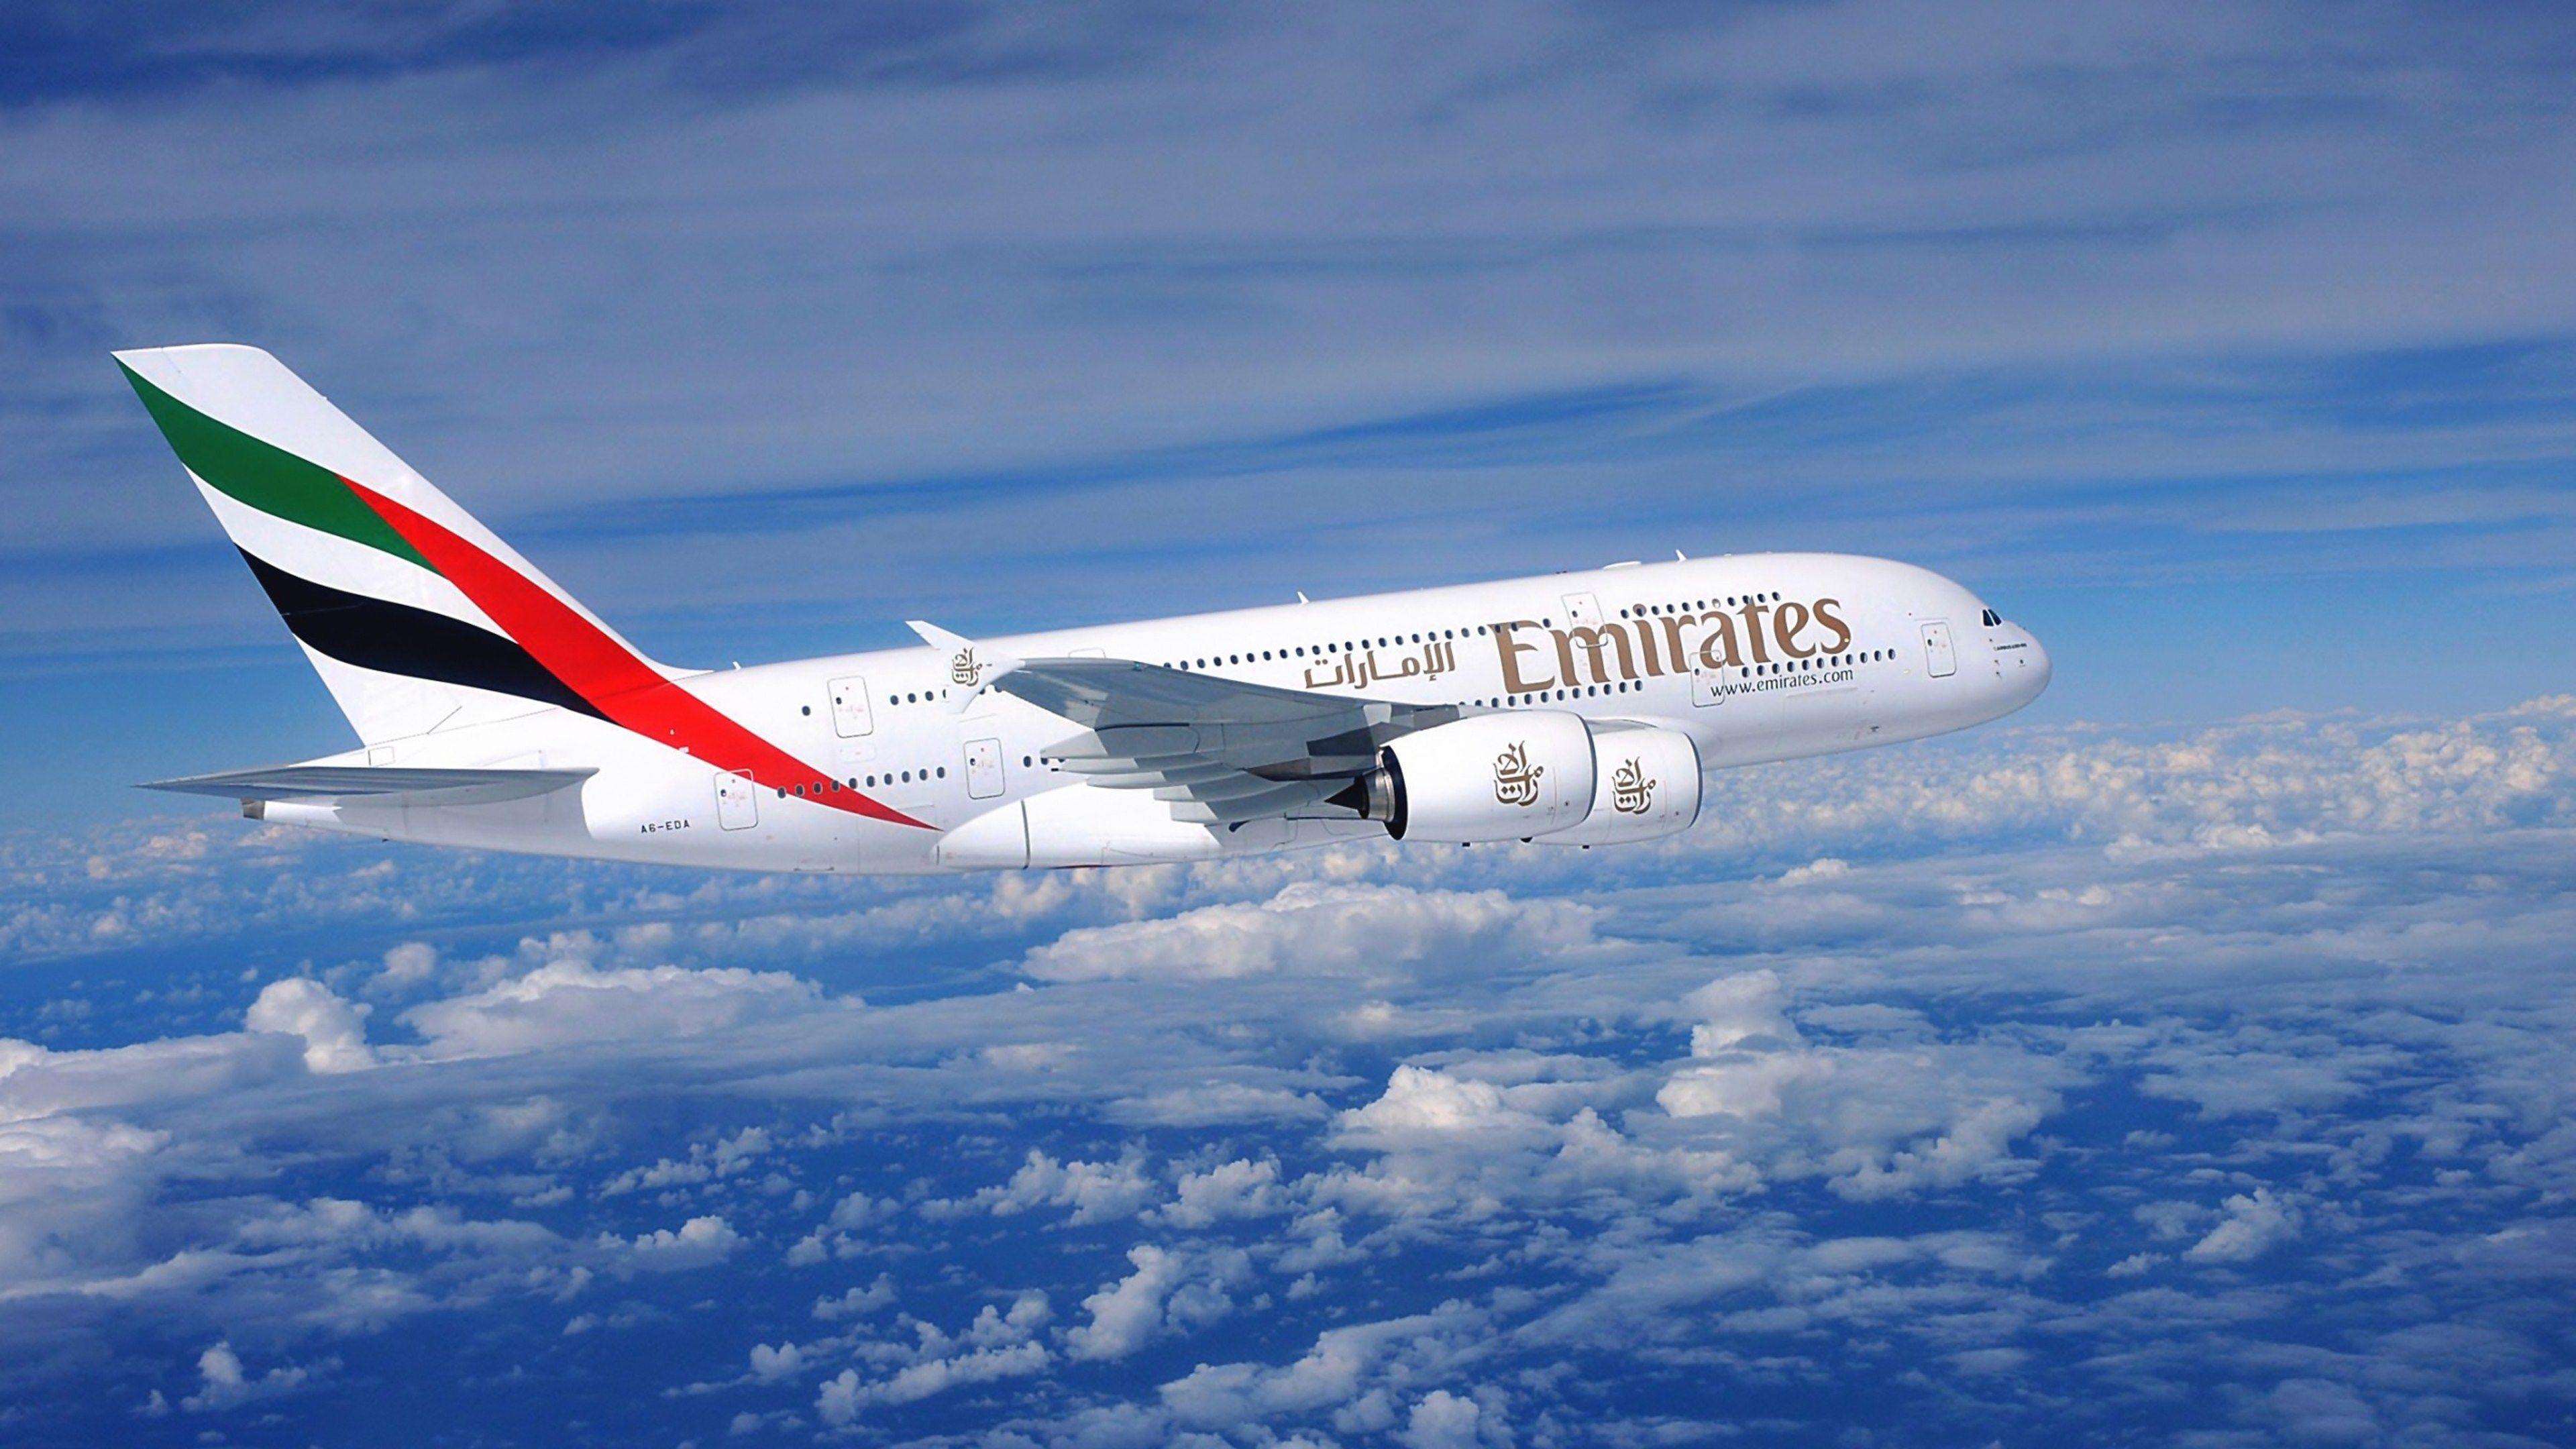 Airbus A380 Wallpaper. Airbus A380 Background